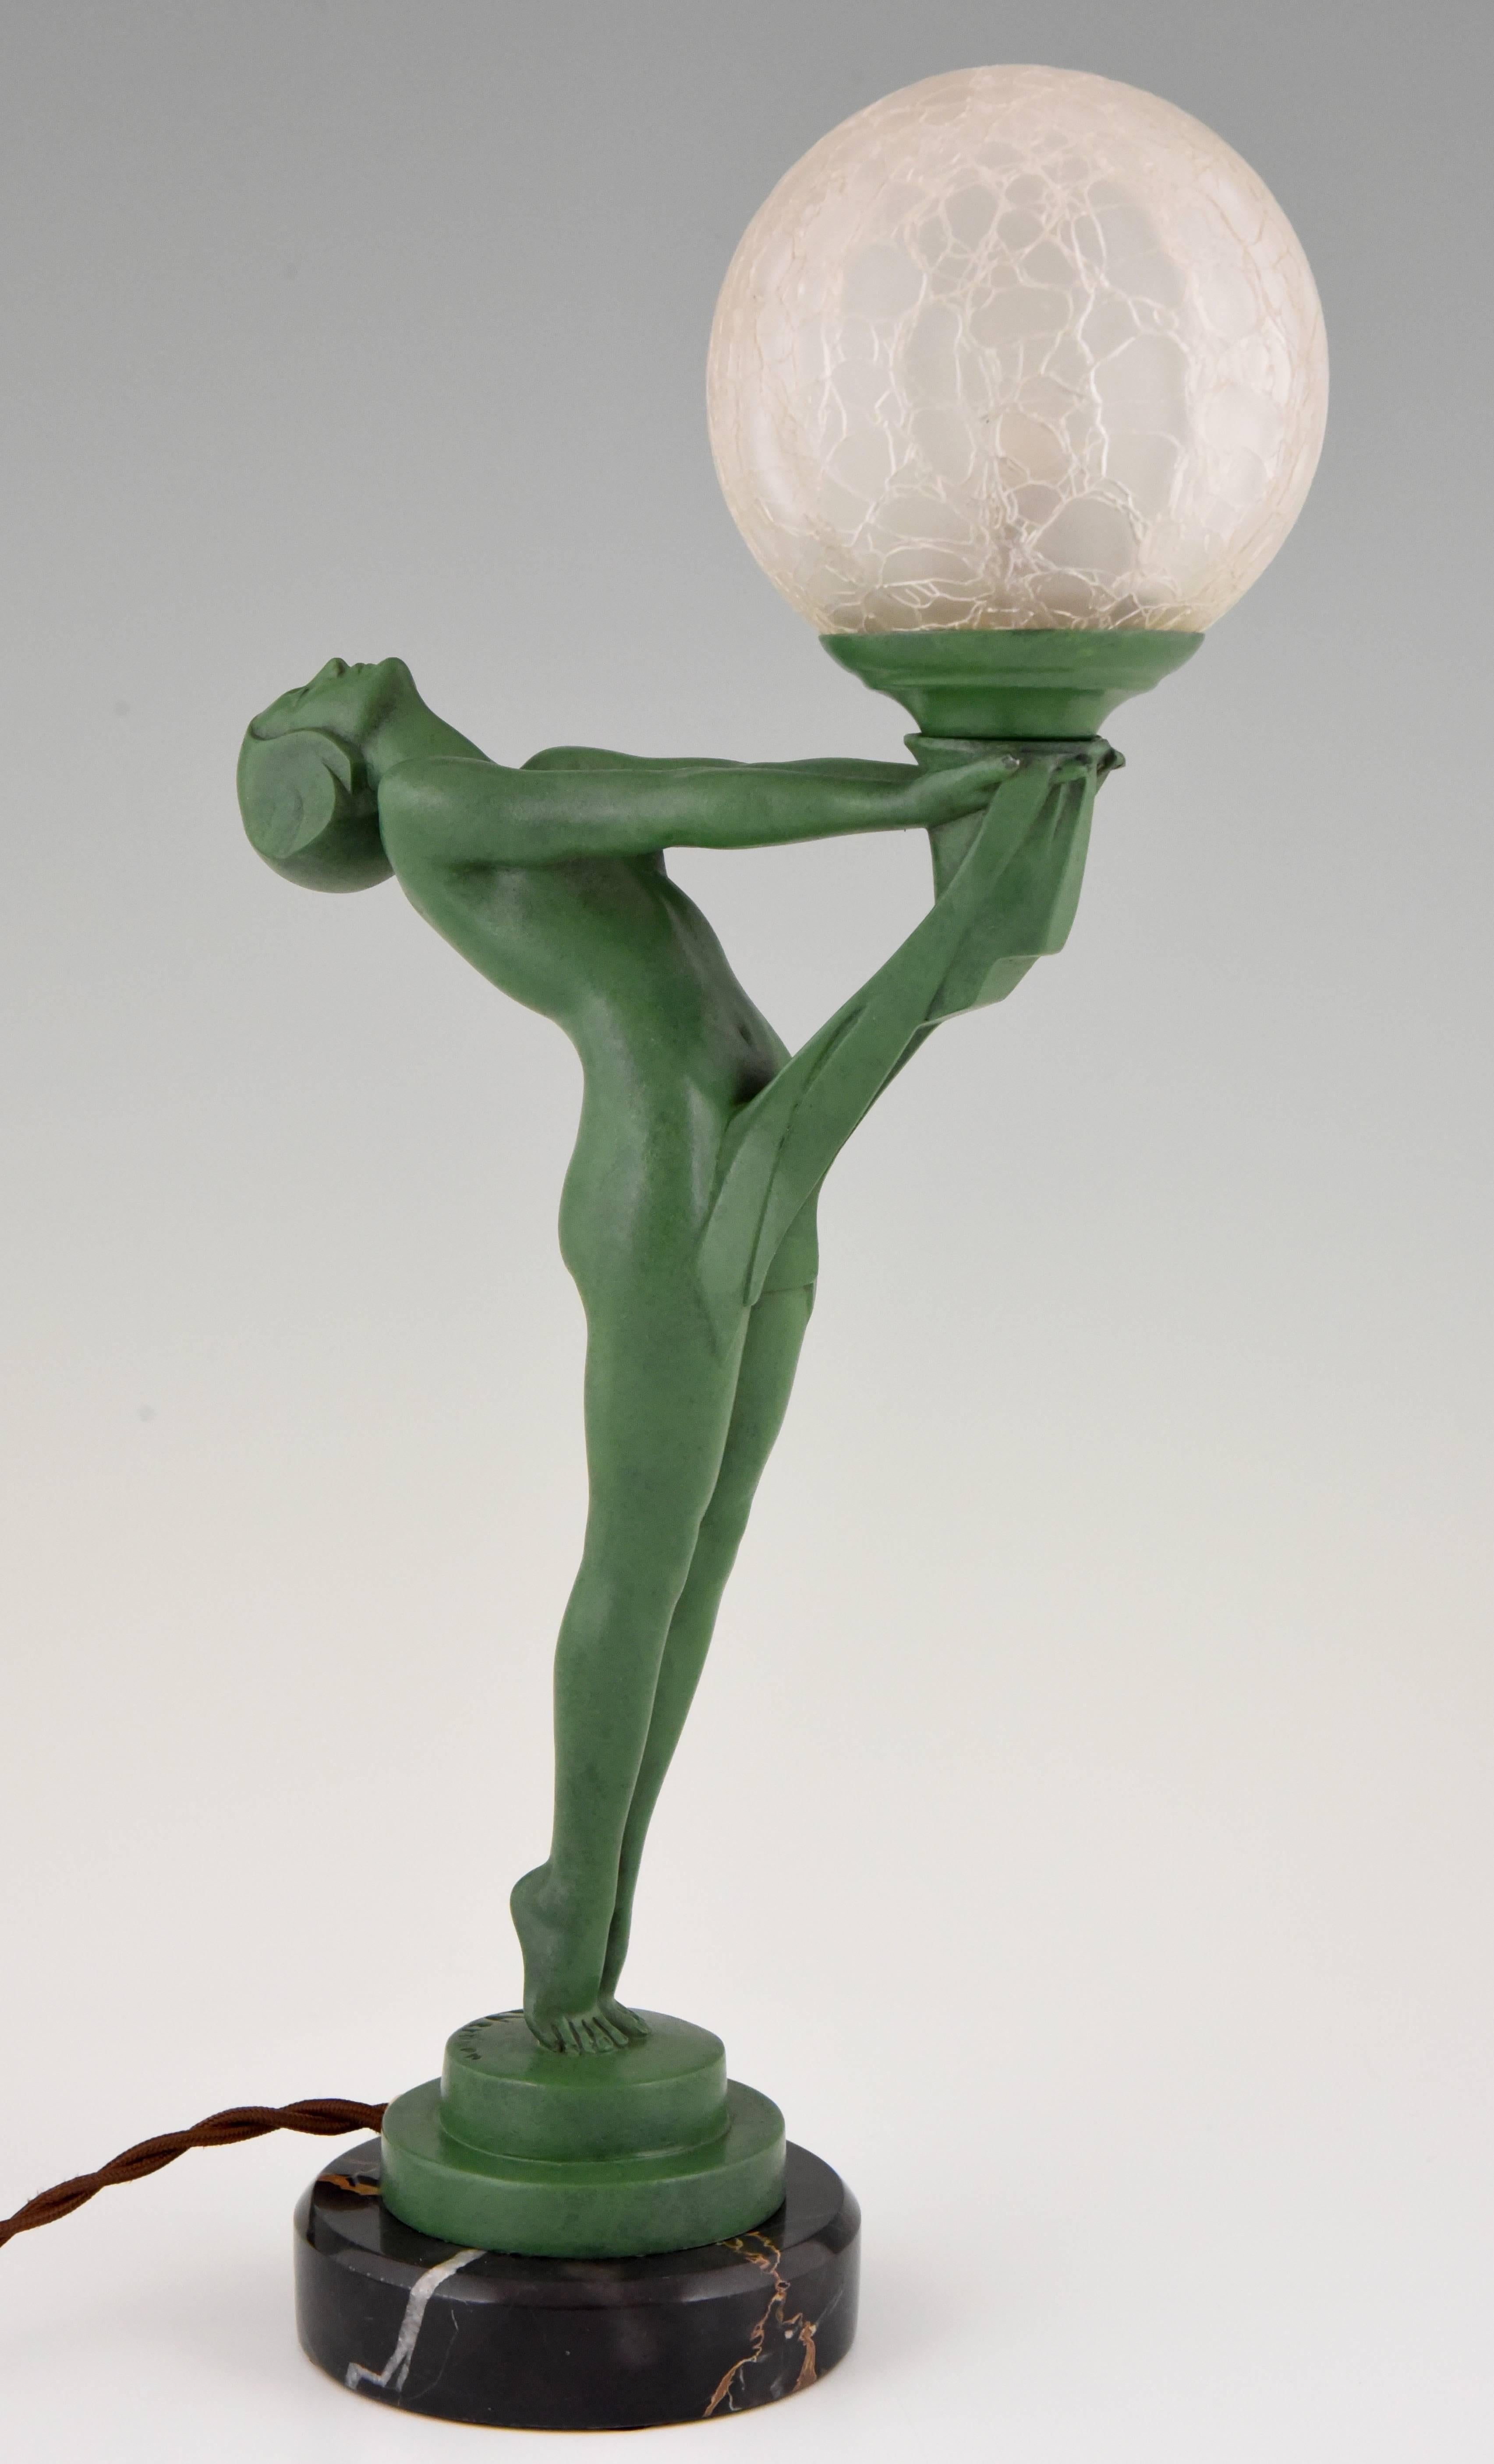 Metal French Art Deco Figural Table Lamp with Standing Nude by Max Le Verrier, 1930